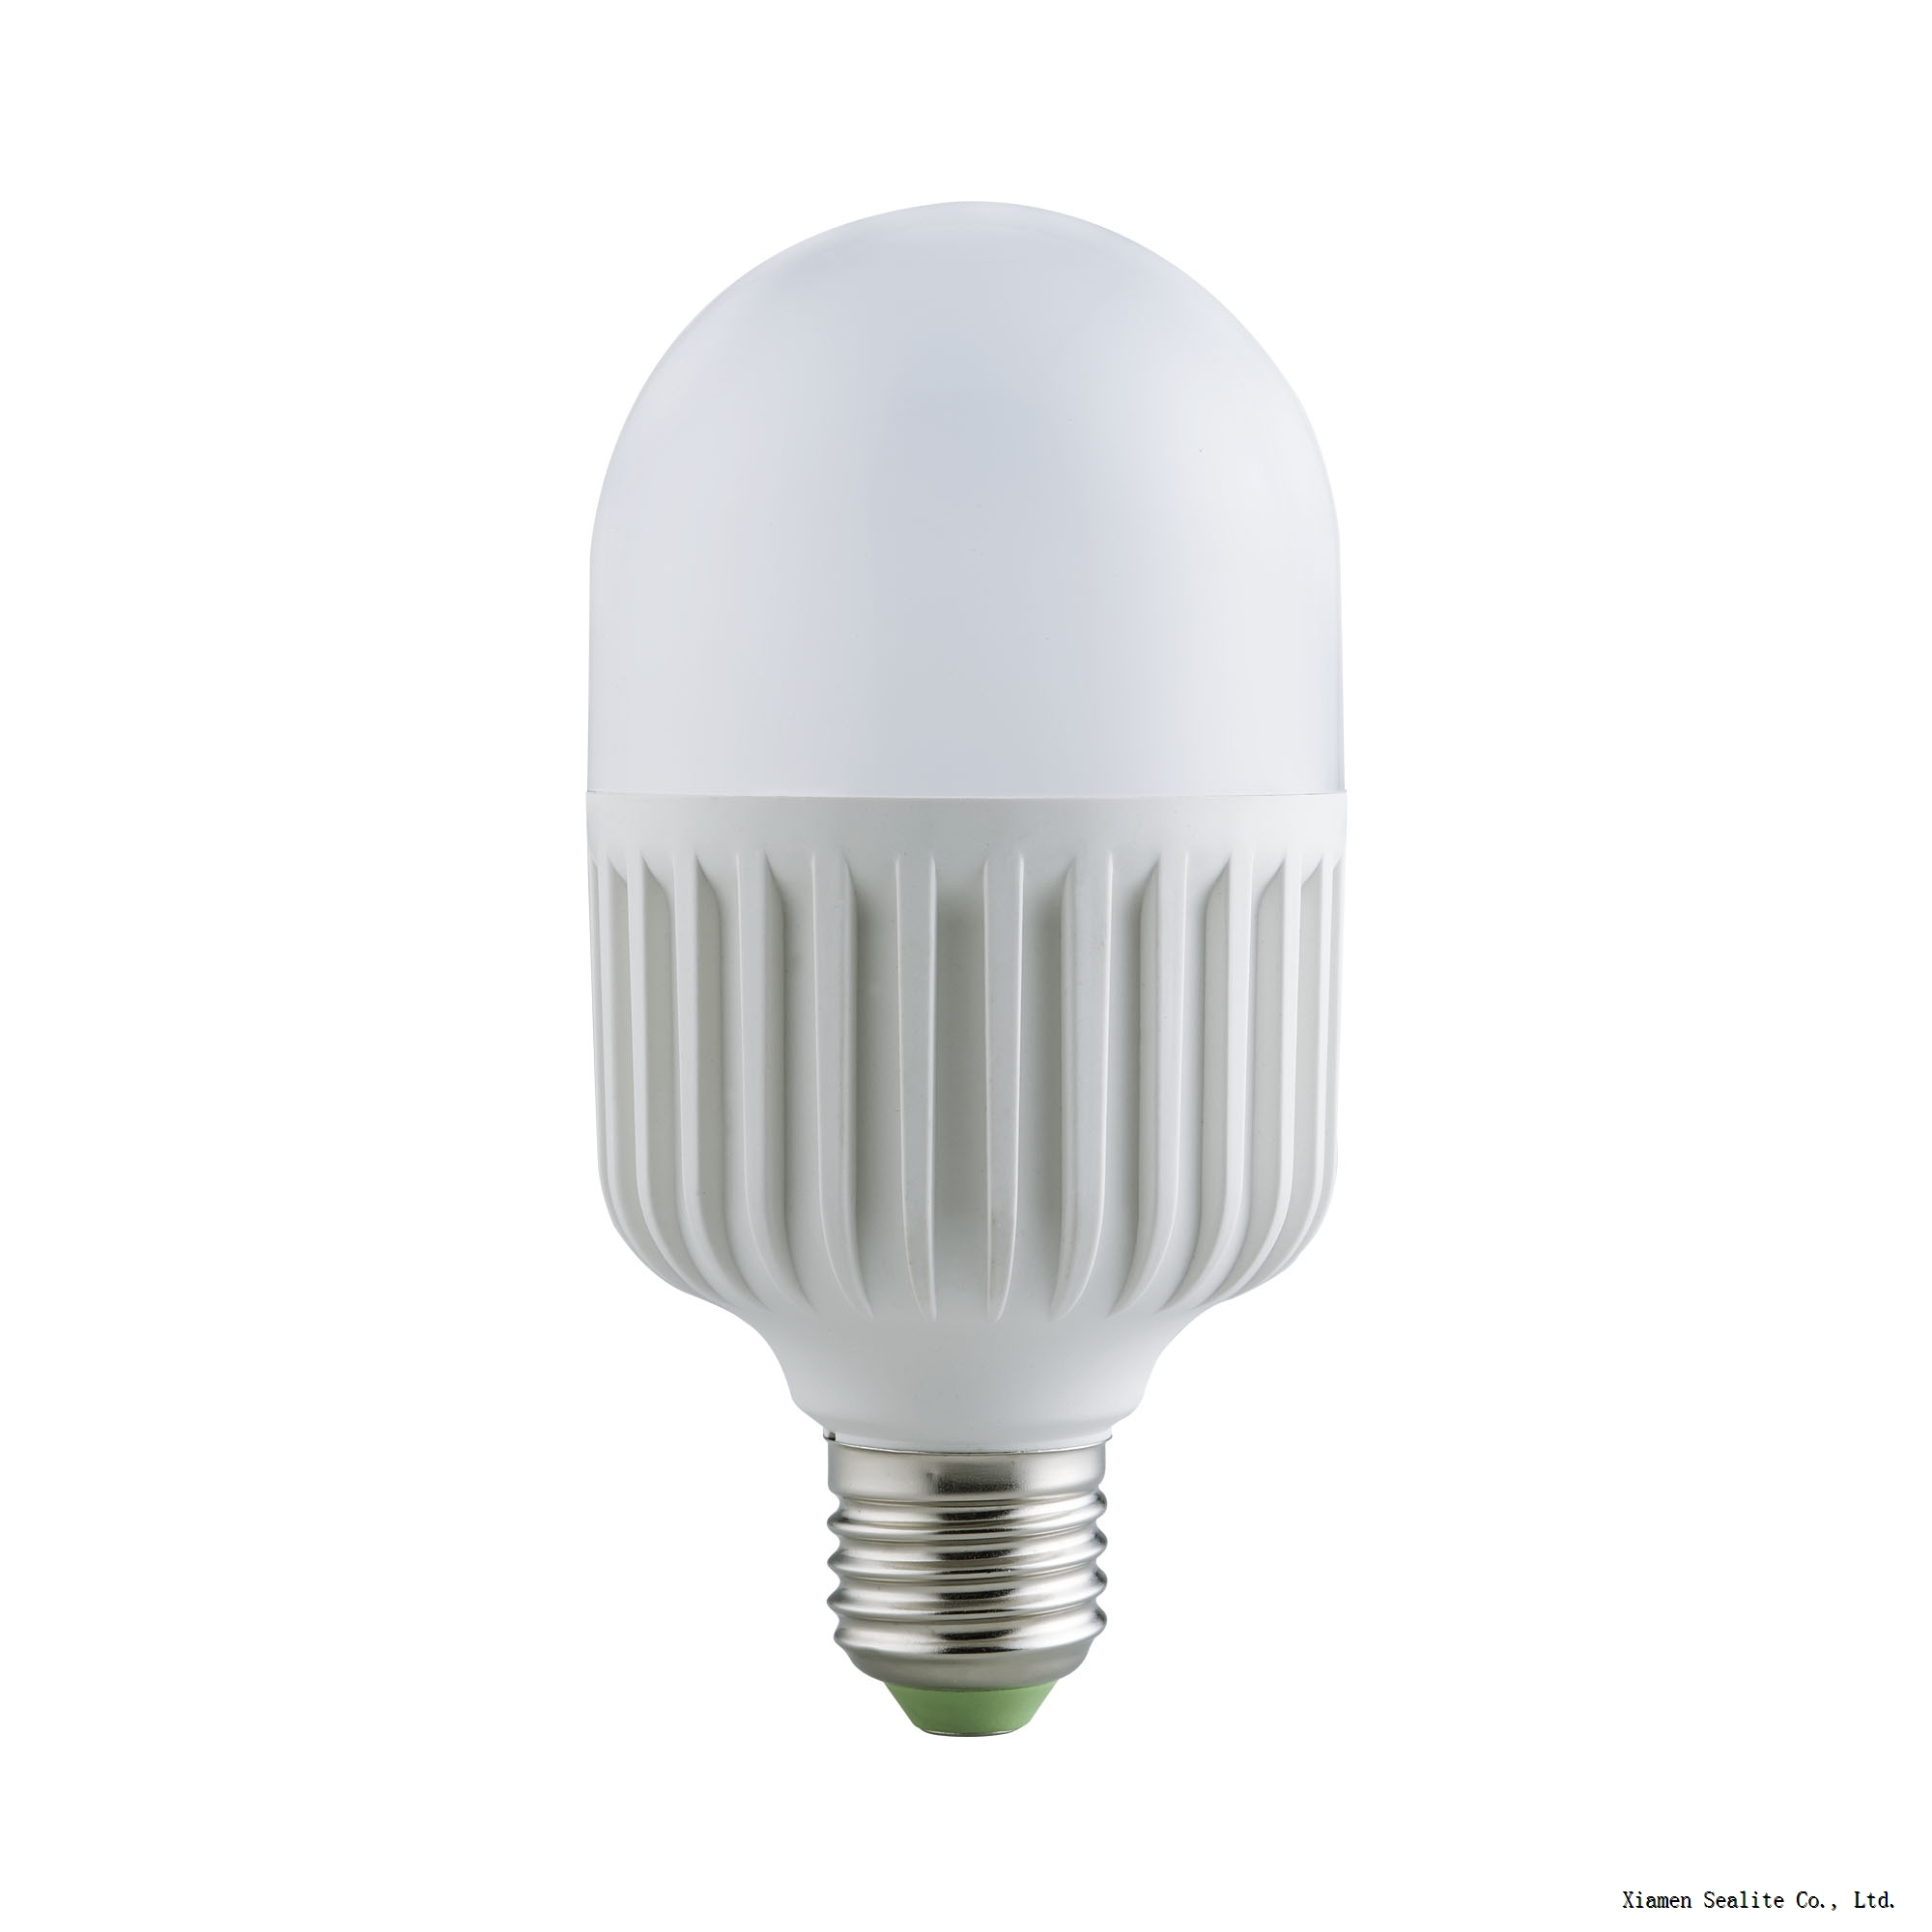 Creative LED Bulb Lamp M70 20W for Home and Commercial Lighting